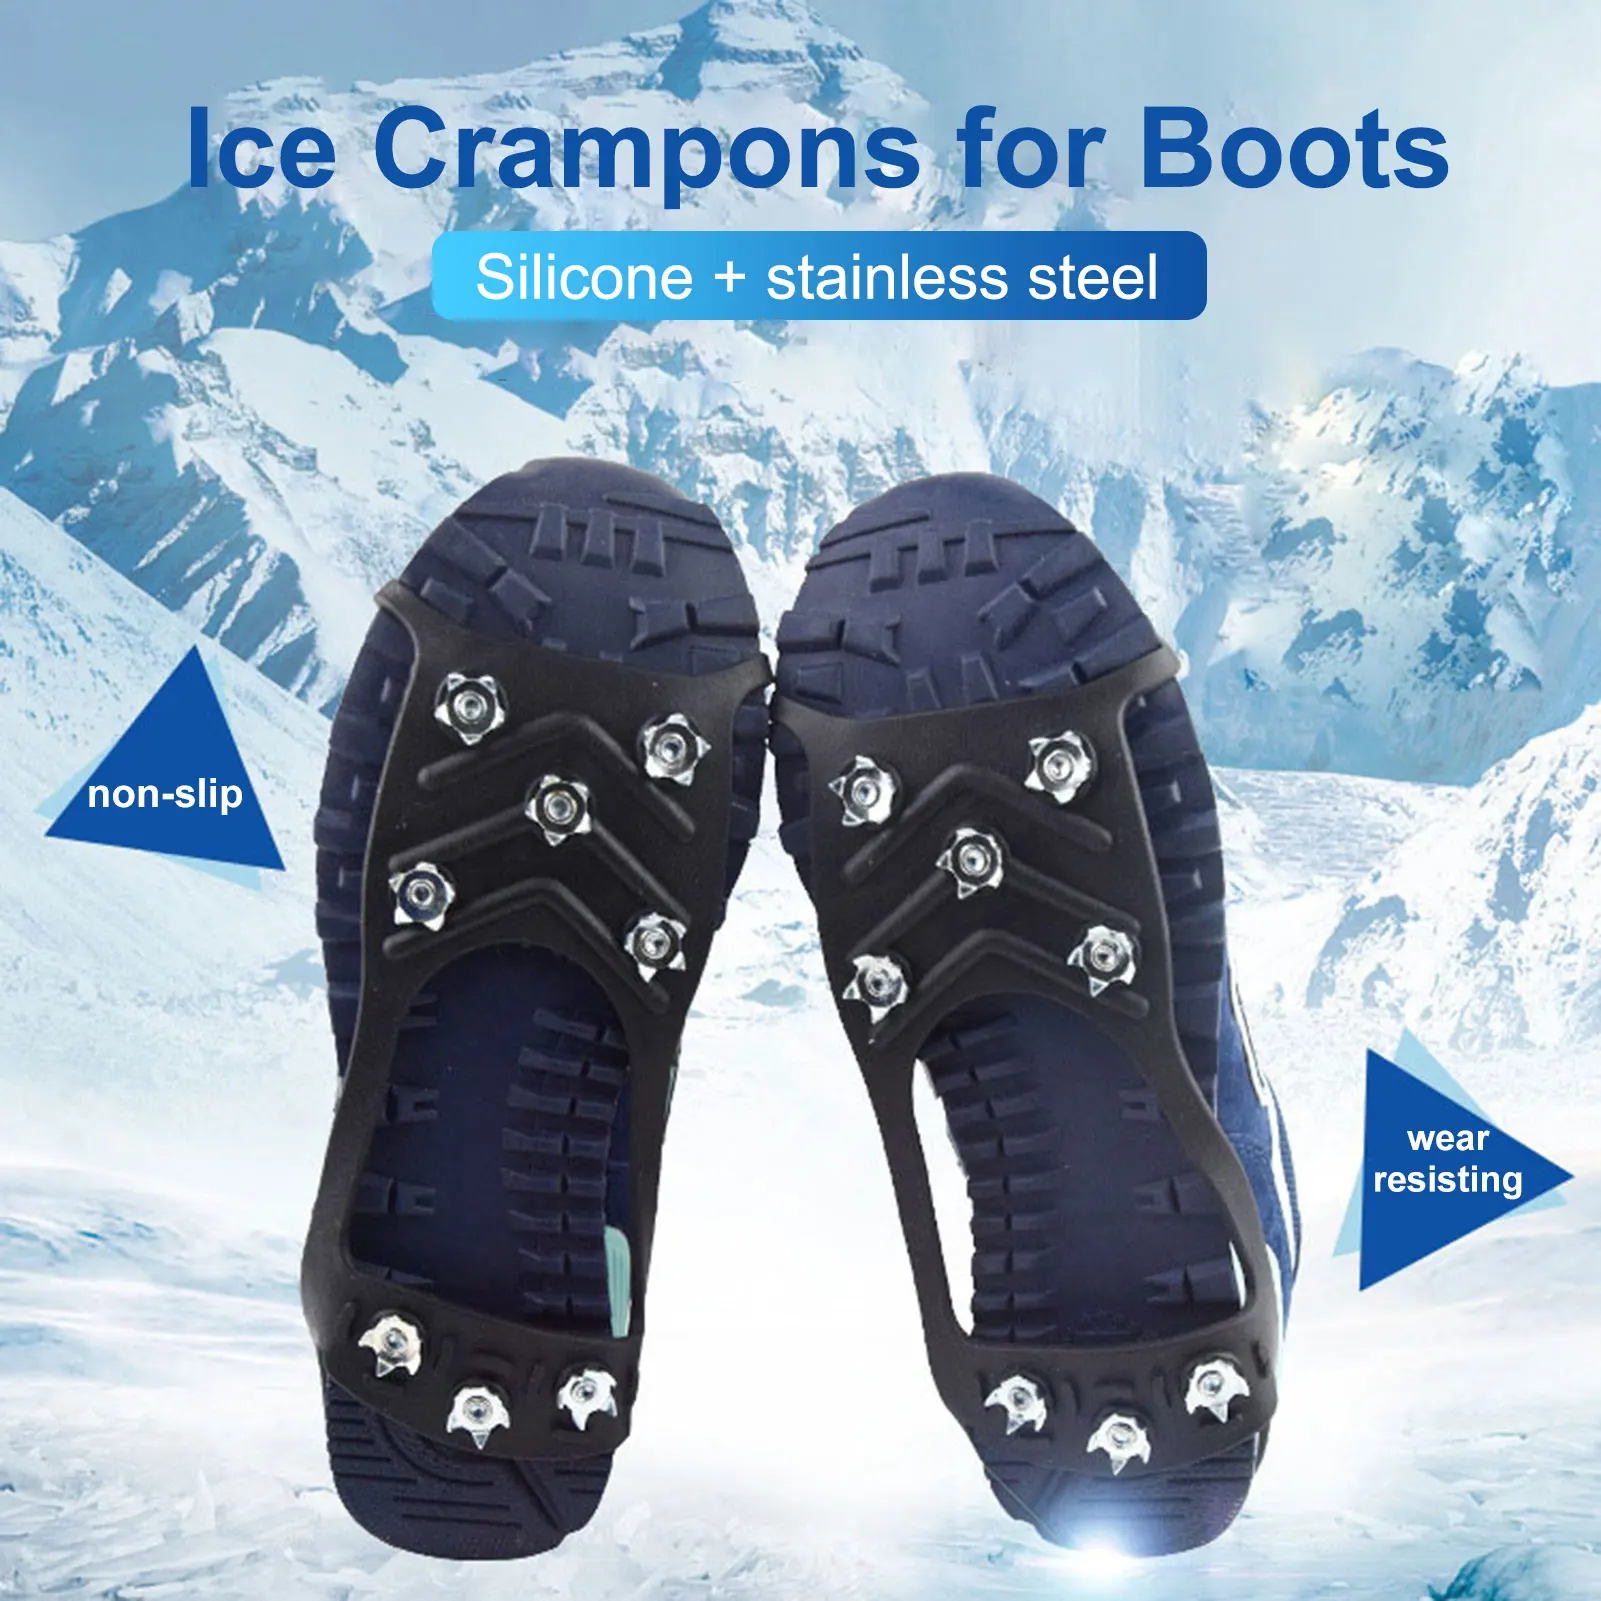 

1 Pair Shoe Ice Cleats Walk Traction Cleats 8 Spikes Outdoor Climbing Crampons for Boots Anti-Skid Walking Fishing Shoes